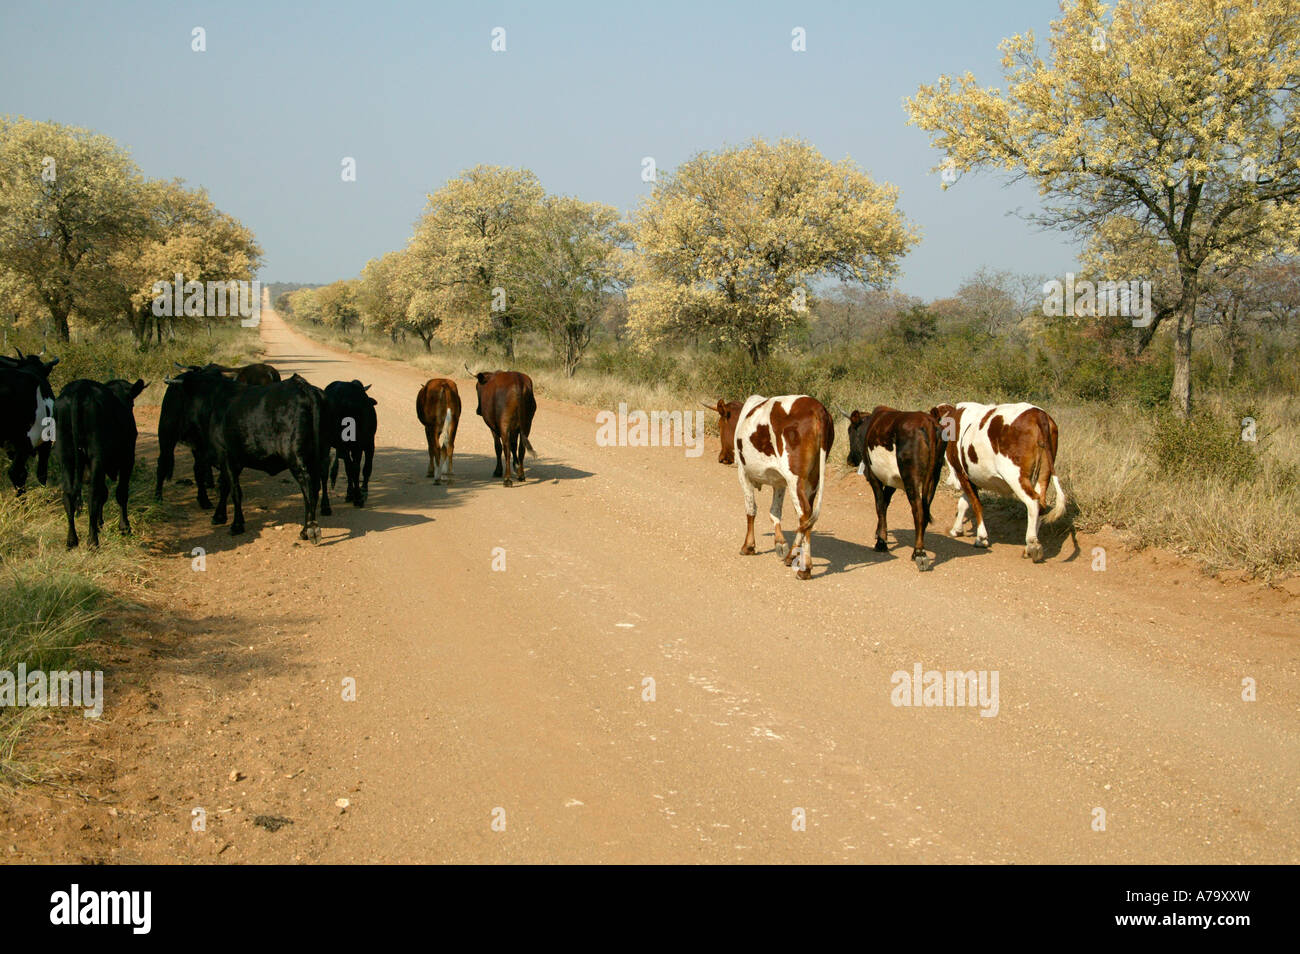 A herd of Nguni cattle walking down a rural dirt road in the lowveld near Tulamahashe with knobthorn trees Acacia nigrescens Stock Photo